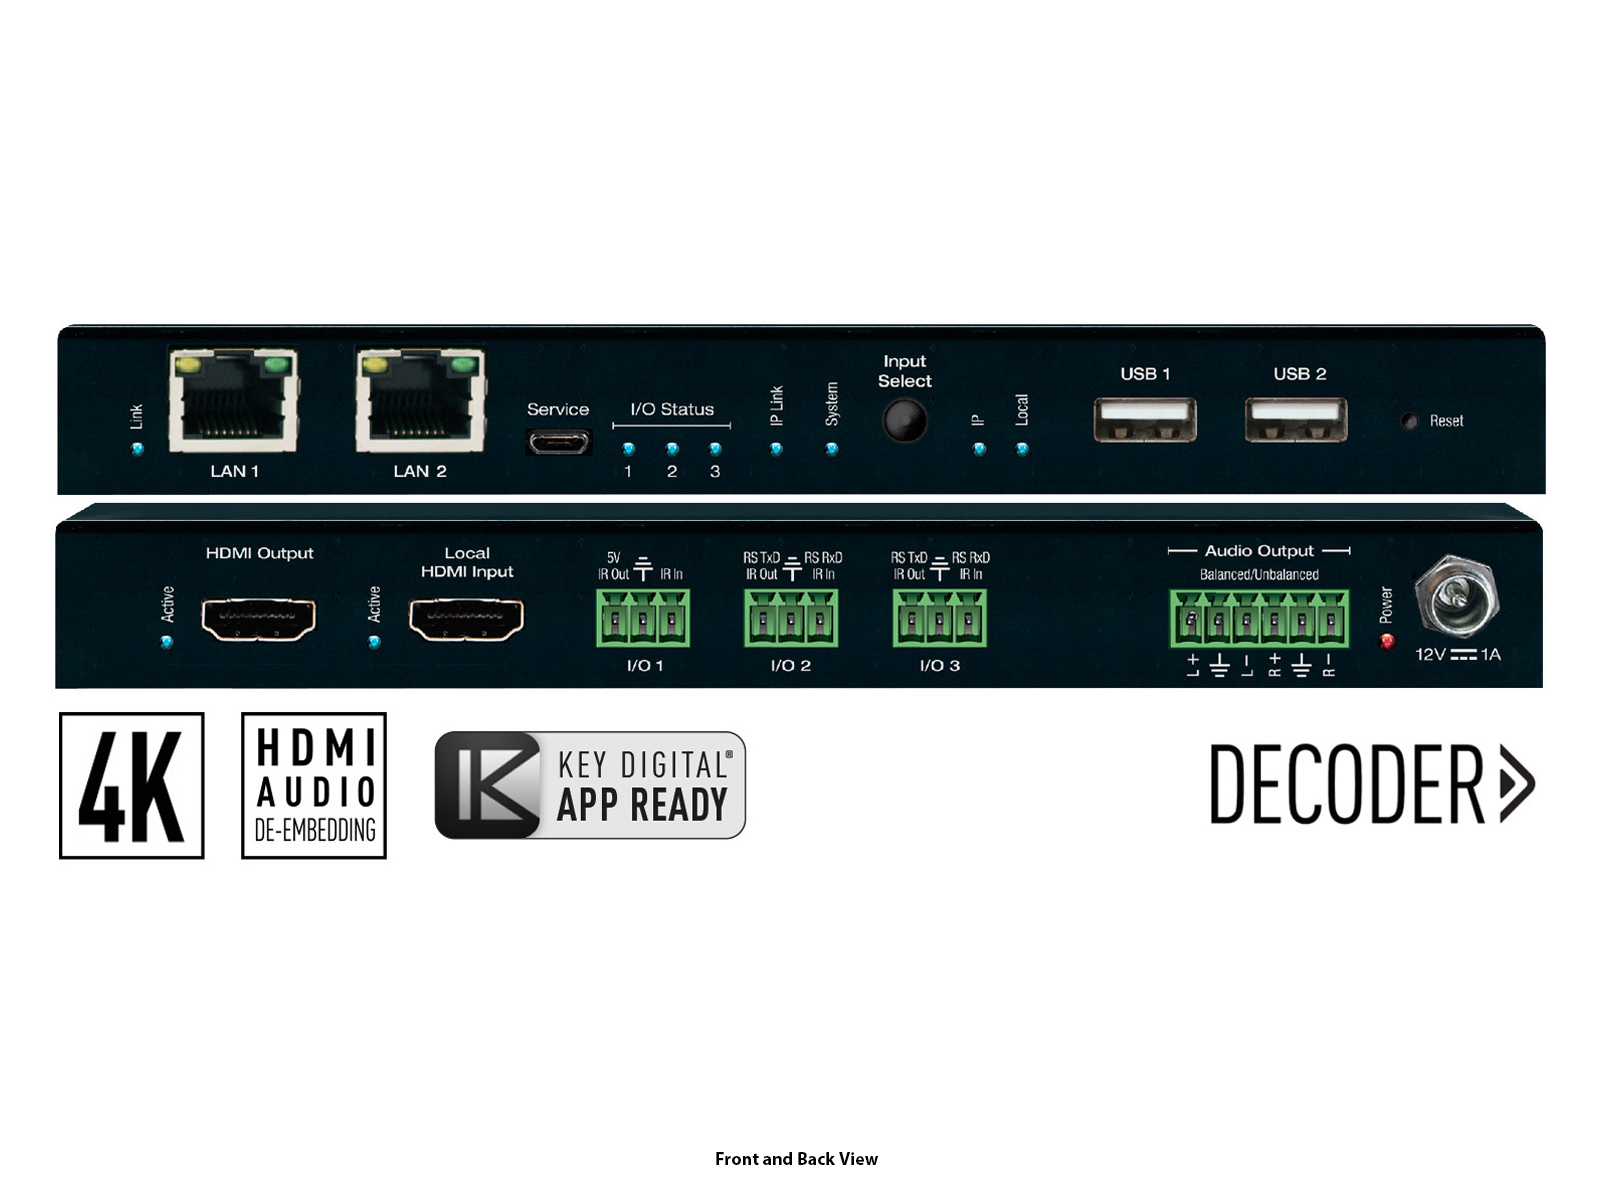 Key Digital KD-IP1022DEC 4K UHD AV over IP Decoder with Independent Video/Audio/KVM/USB Routing and Video Wall Processing